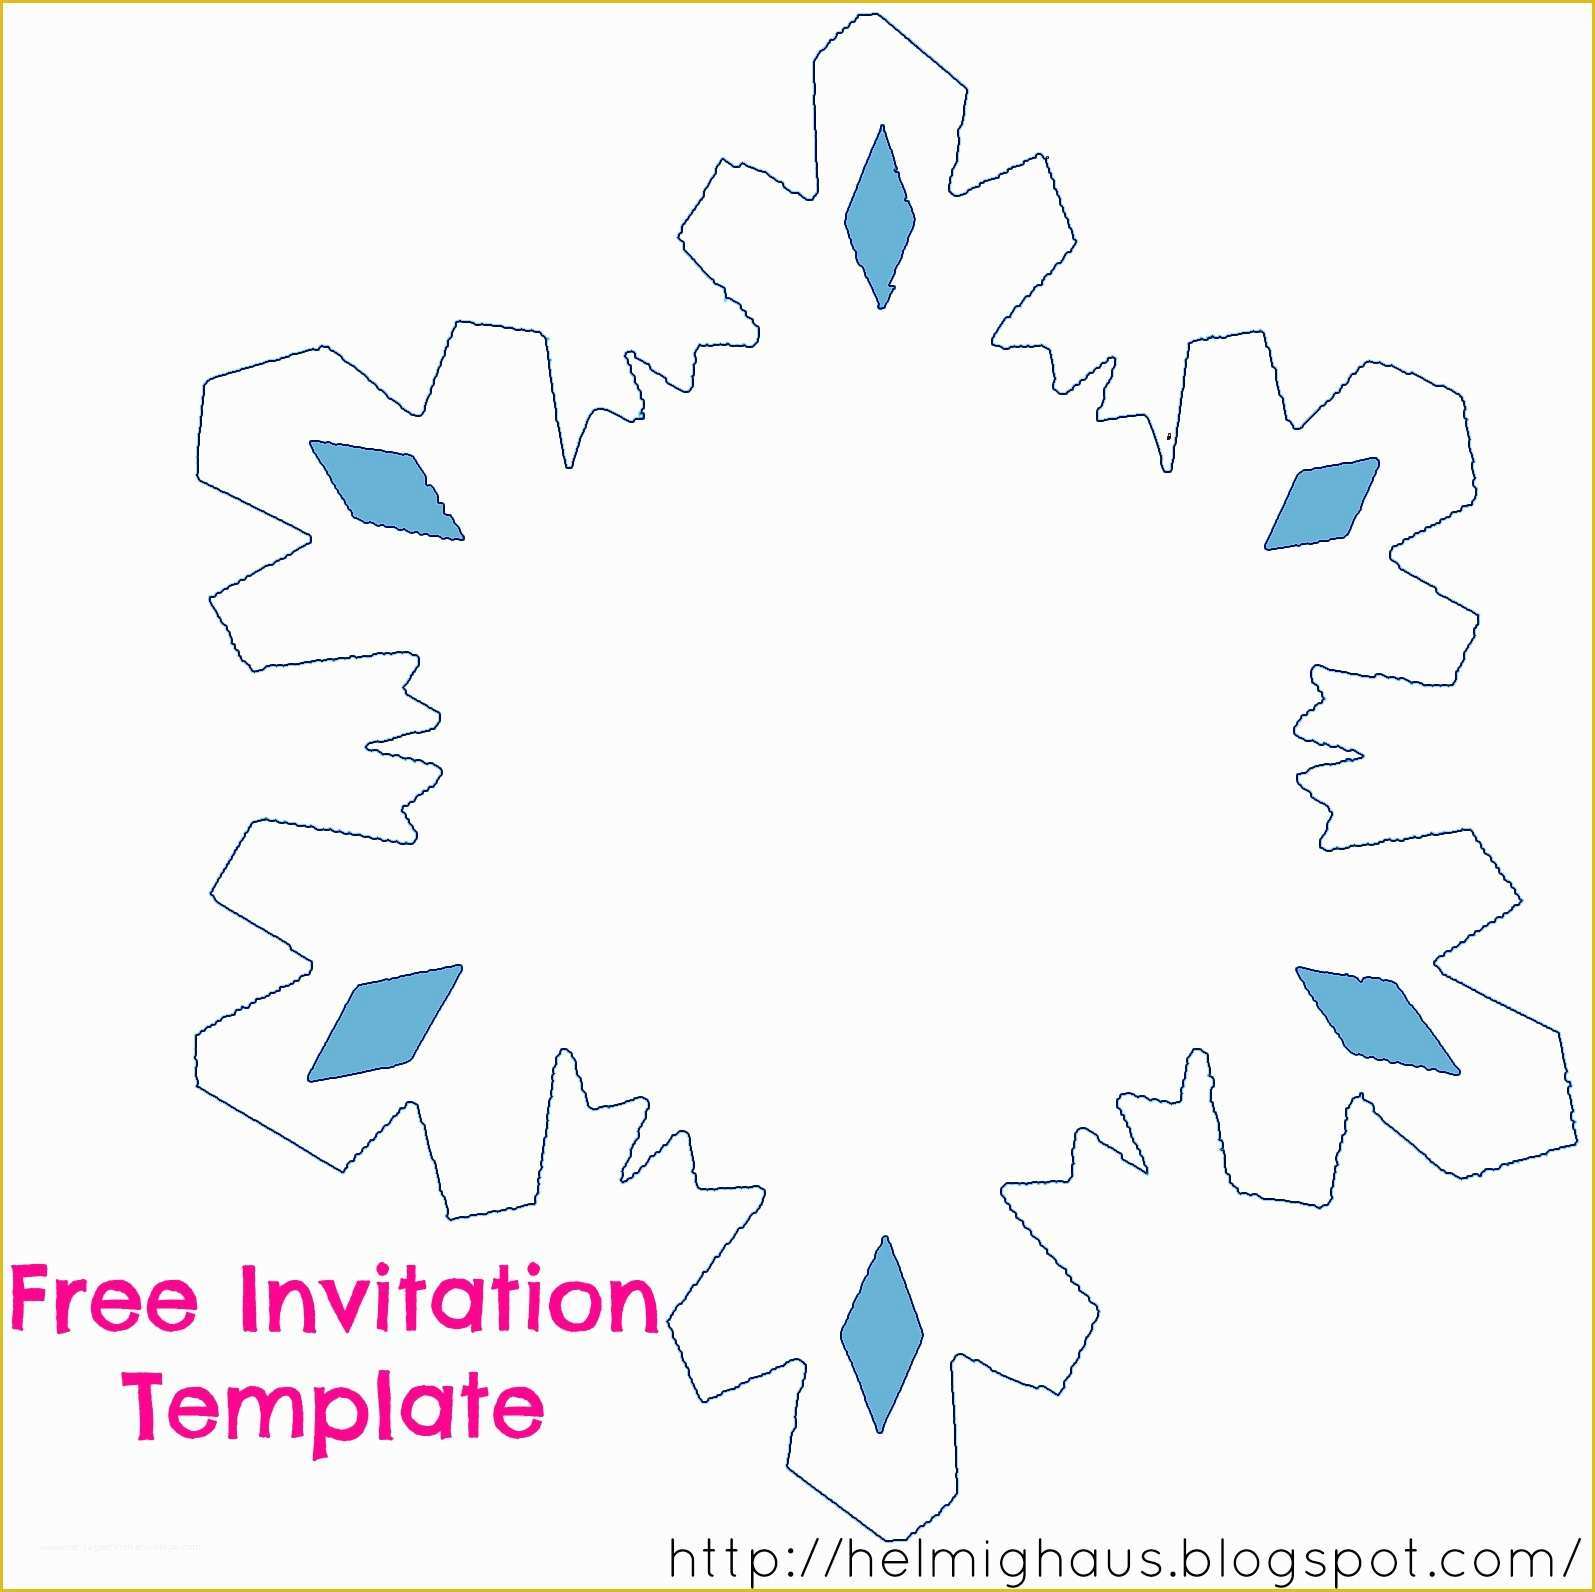 Free Printable Frozen Invitations Templates Of Helmighaus November 2014